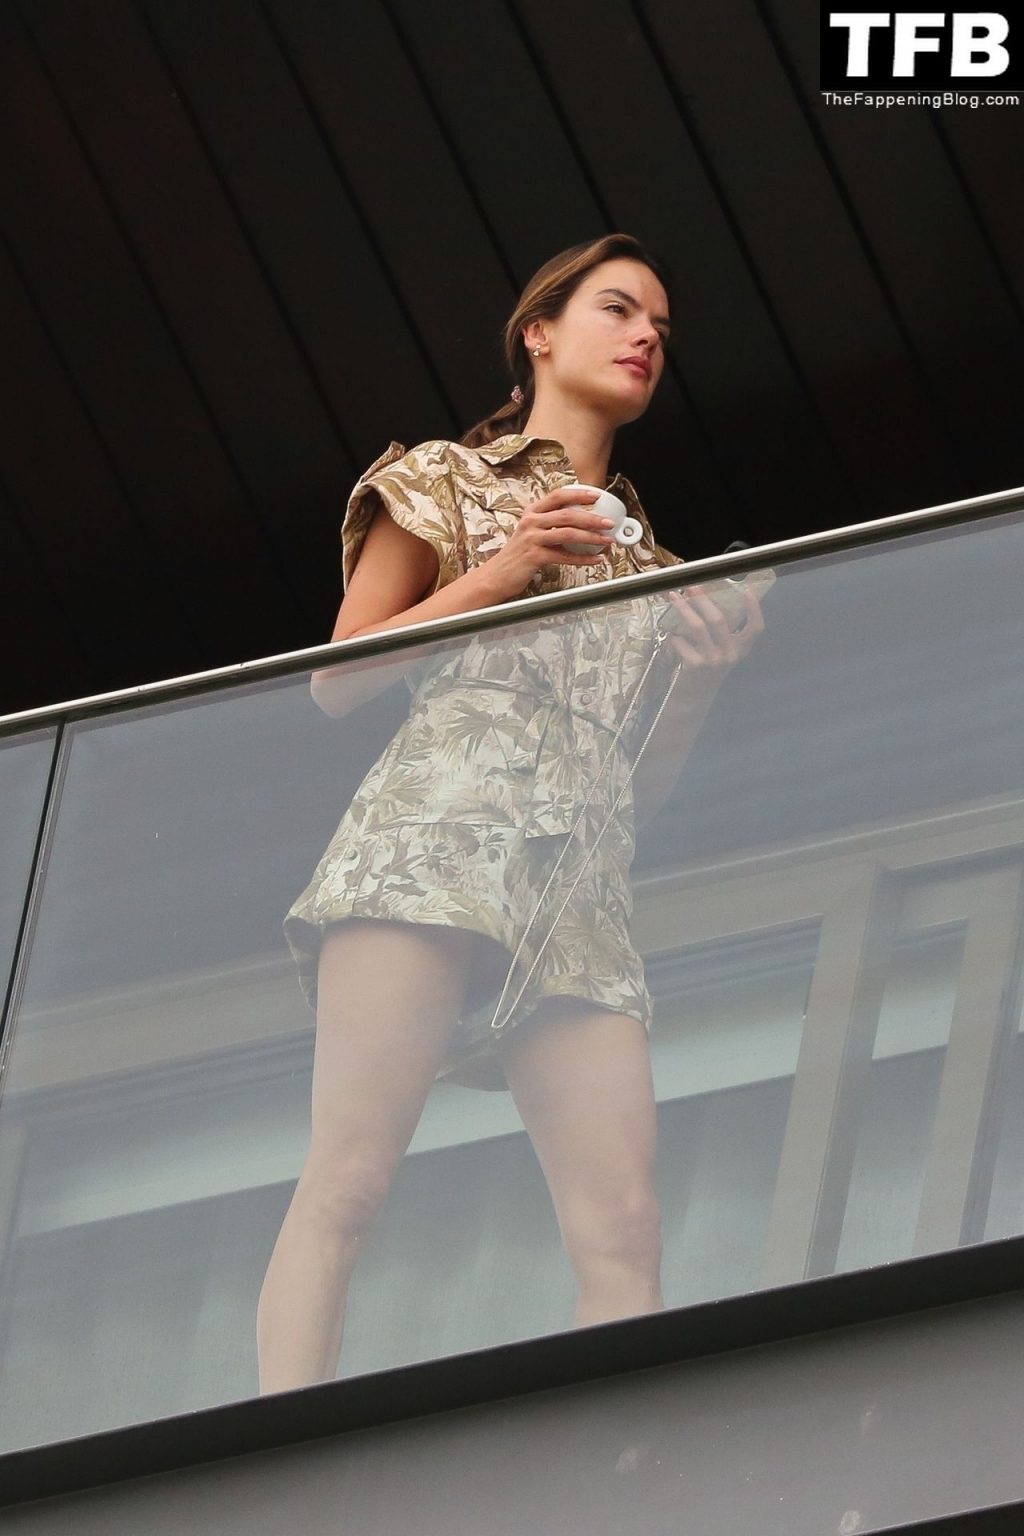 Leggy Alessandra Ambrosio Snaps Away While Enjoying the View From Her Hotel Balcony (24 Photos)